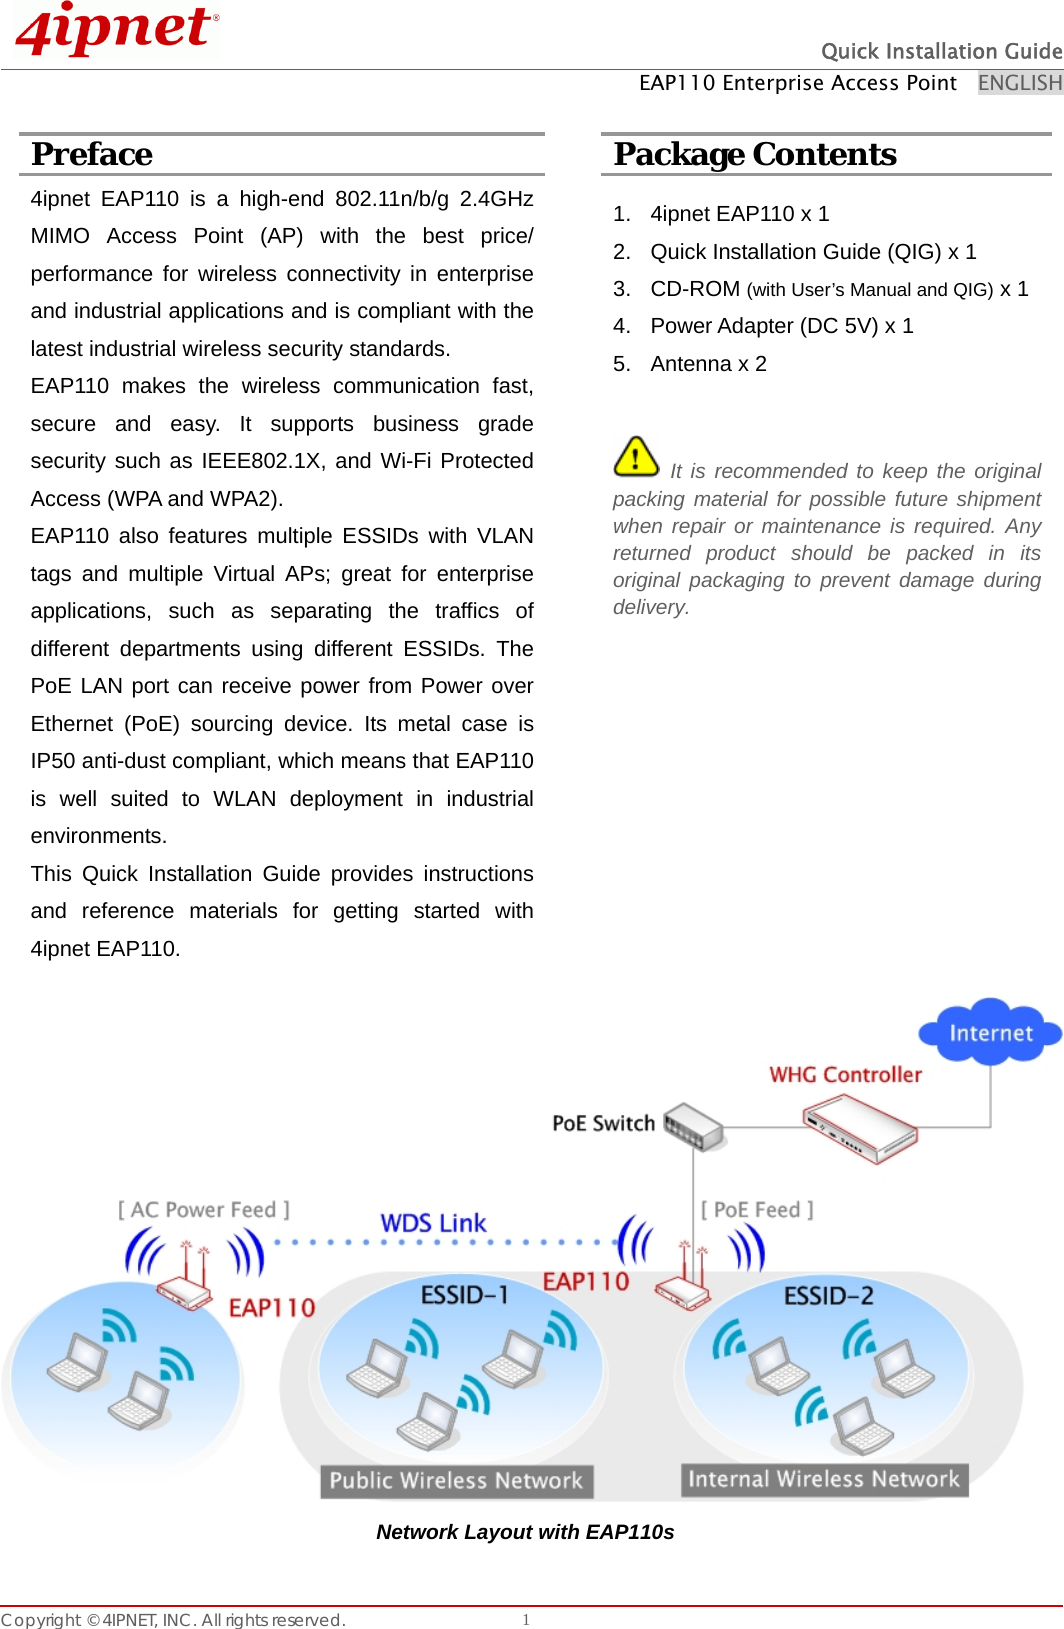  Quick Installation Guide EAP110 Enterprise Access Point    ENGLISH Copyright © 4IPNET, INC. All rights reserved.    1 Preface  Package Contents 4ipnet EAP110 is a high-end 802.11n/b/g 2.4GHz MIMO Access Point (AP) with the best price/ performance for wireless connectivity in enterprise and industrial applications and is compliant with the latest industrial wireless security standards.   EAP110 makes the wireless communication fast, secure and easy. It supports business grade security such as IEEE802.1X, and Wi-Fi Protected Access (WPA and WPA2).   EAP110 also features multiple ESSIDs with VLAN tags and multiple Virtual APs; great for enterprise applications, such as separating the traffics of different departments using different ESSIDs. The PoE LAN port can receive power from Power over Ethernet (PoE) sourcing device. Its metal case is IP50 anti-dust compliant, which means that EAP110 is well suited to WLAN deployment in industrial environments. This Quick Installation Guide provides instructions and reference materials for getting started with 4ipnet EAP110.  1.  4ipnet EAP110 x 1 2.  Quick Installation Guide (QIG) x 1 3. CD-ROM (with User’s Manual and QIG) x 1 4.  Power Adapter (DC 5V) x 1 5.  Antenna x 2   It is recommended to keep the original packing material for possible future shipment when repair or maintenance is required. Any returned product should be packed in its original packaging to prevent damage during delivery.   Network Layout with EAP110s 